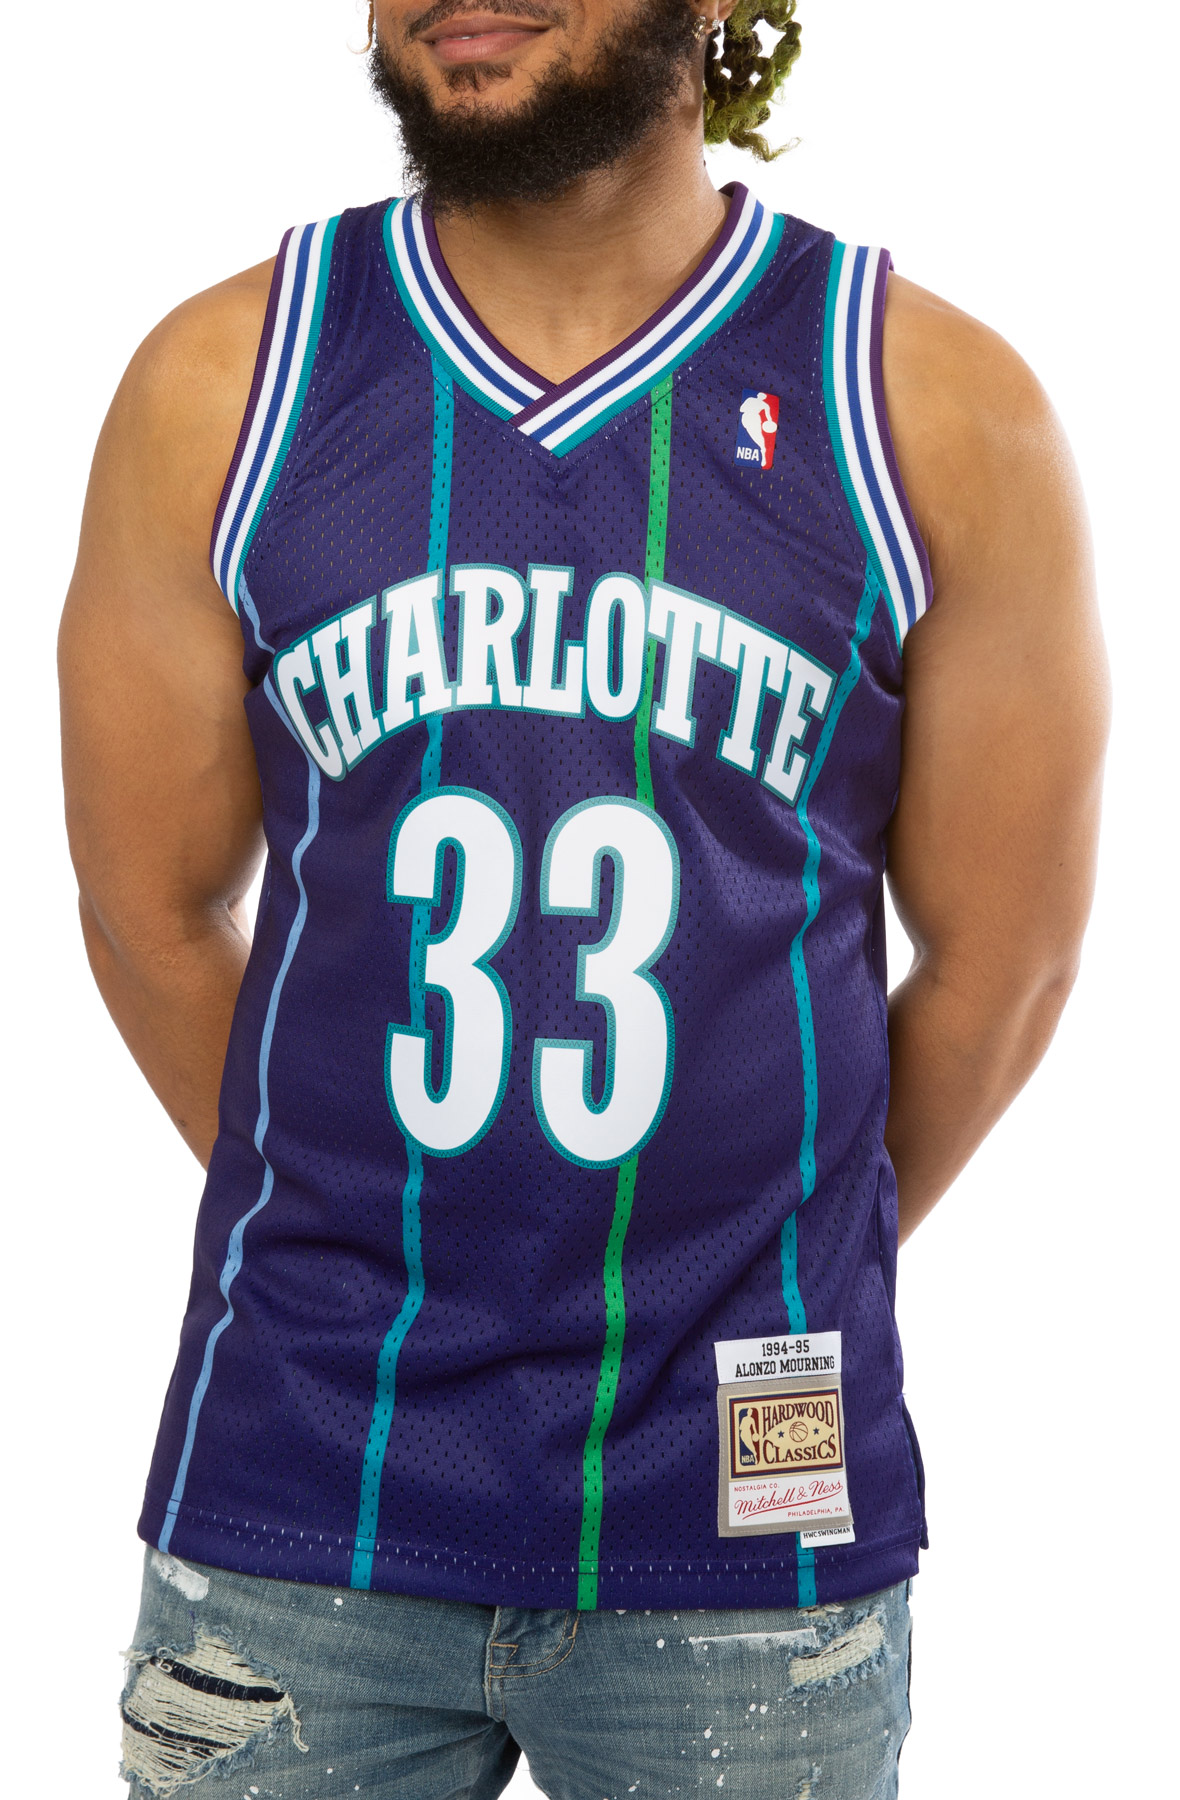 Authentic Jersey Charlotte Hornets 1994-95 Alonzo Mourning - Shop